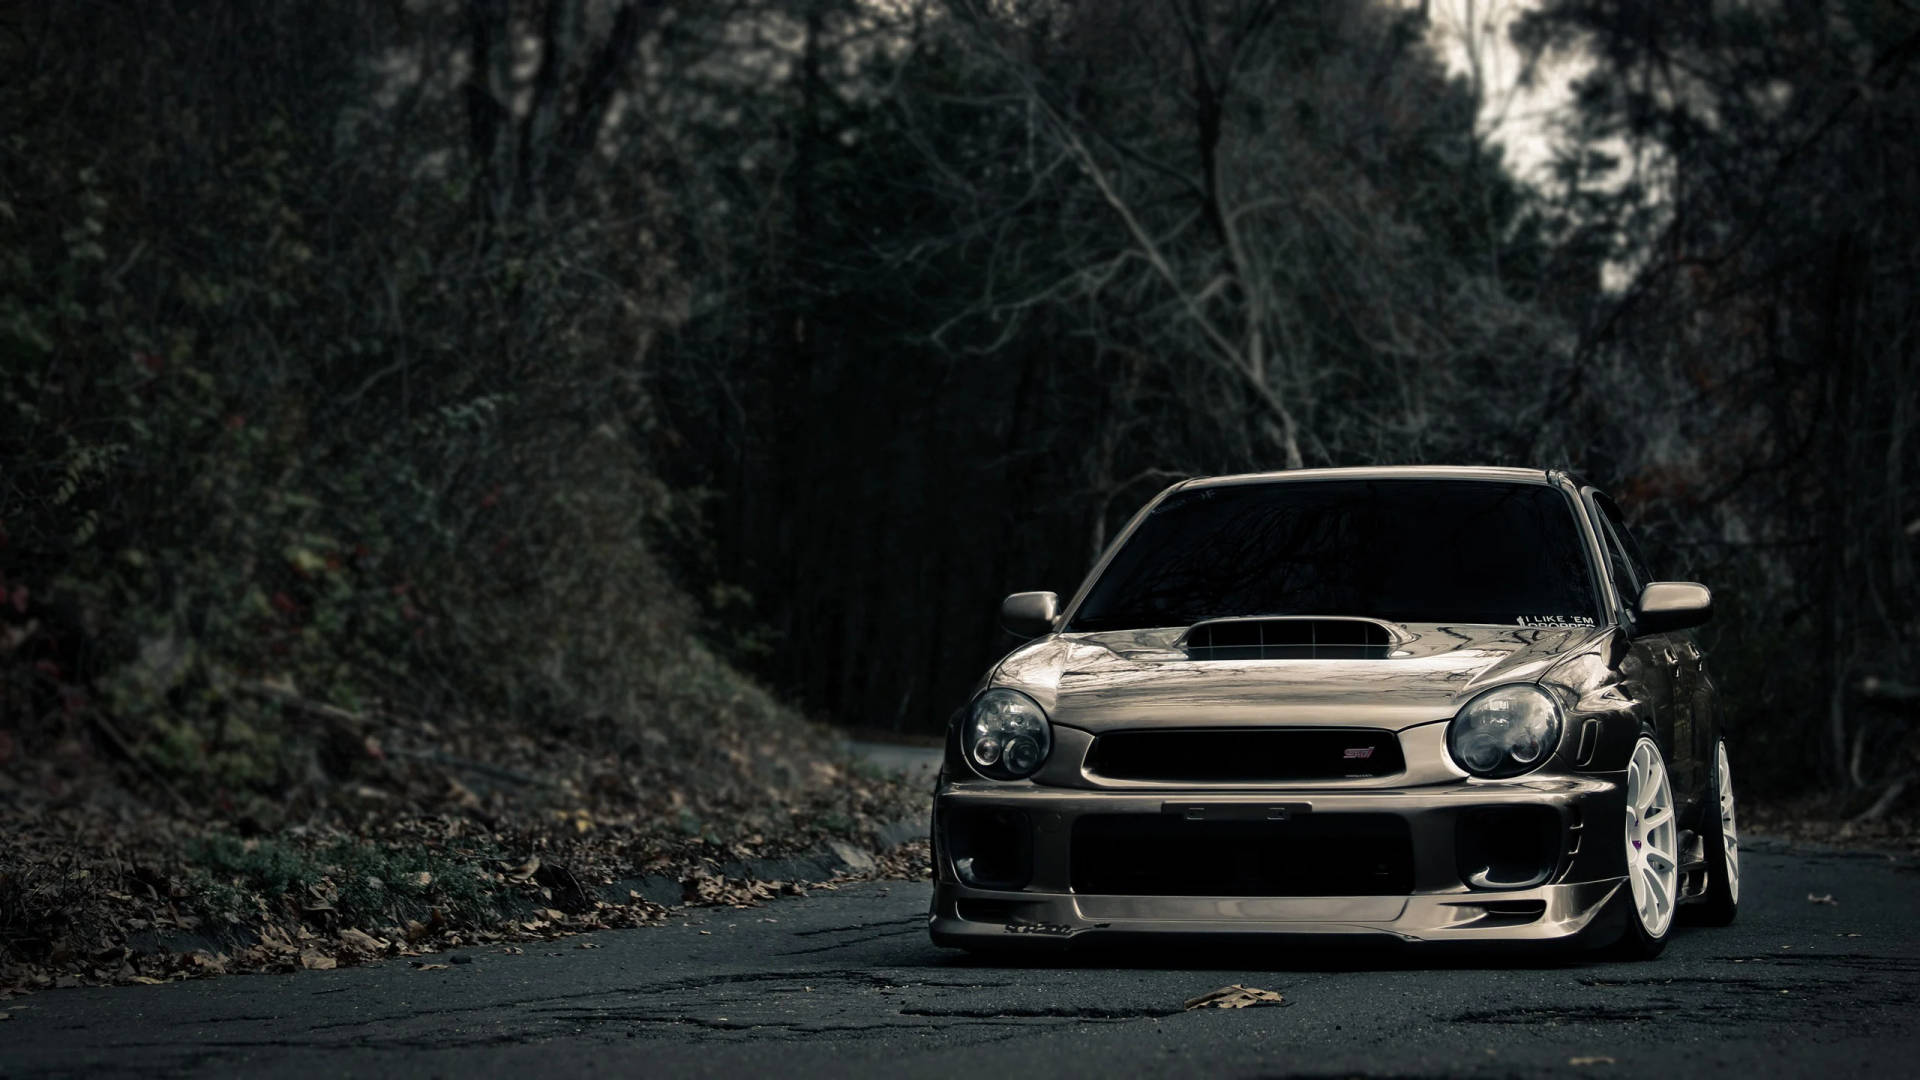 2560 X 1440 Car Silver Bugeye Forest Subaru Picture